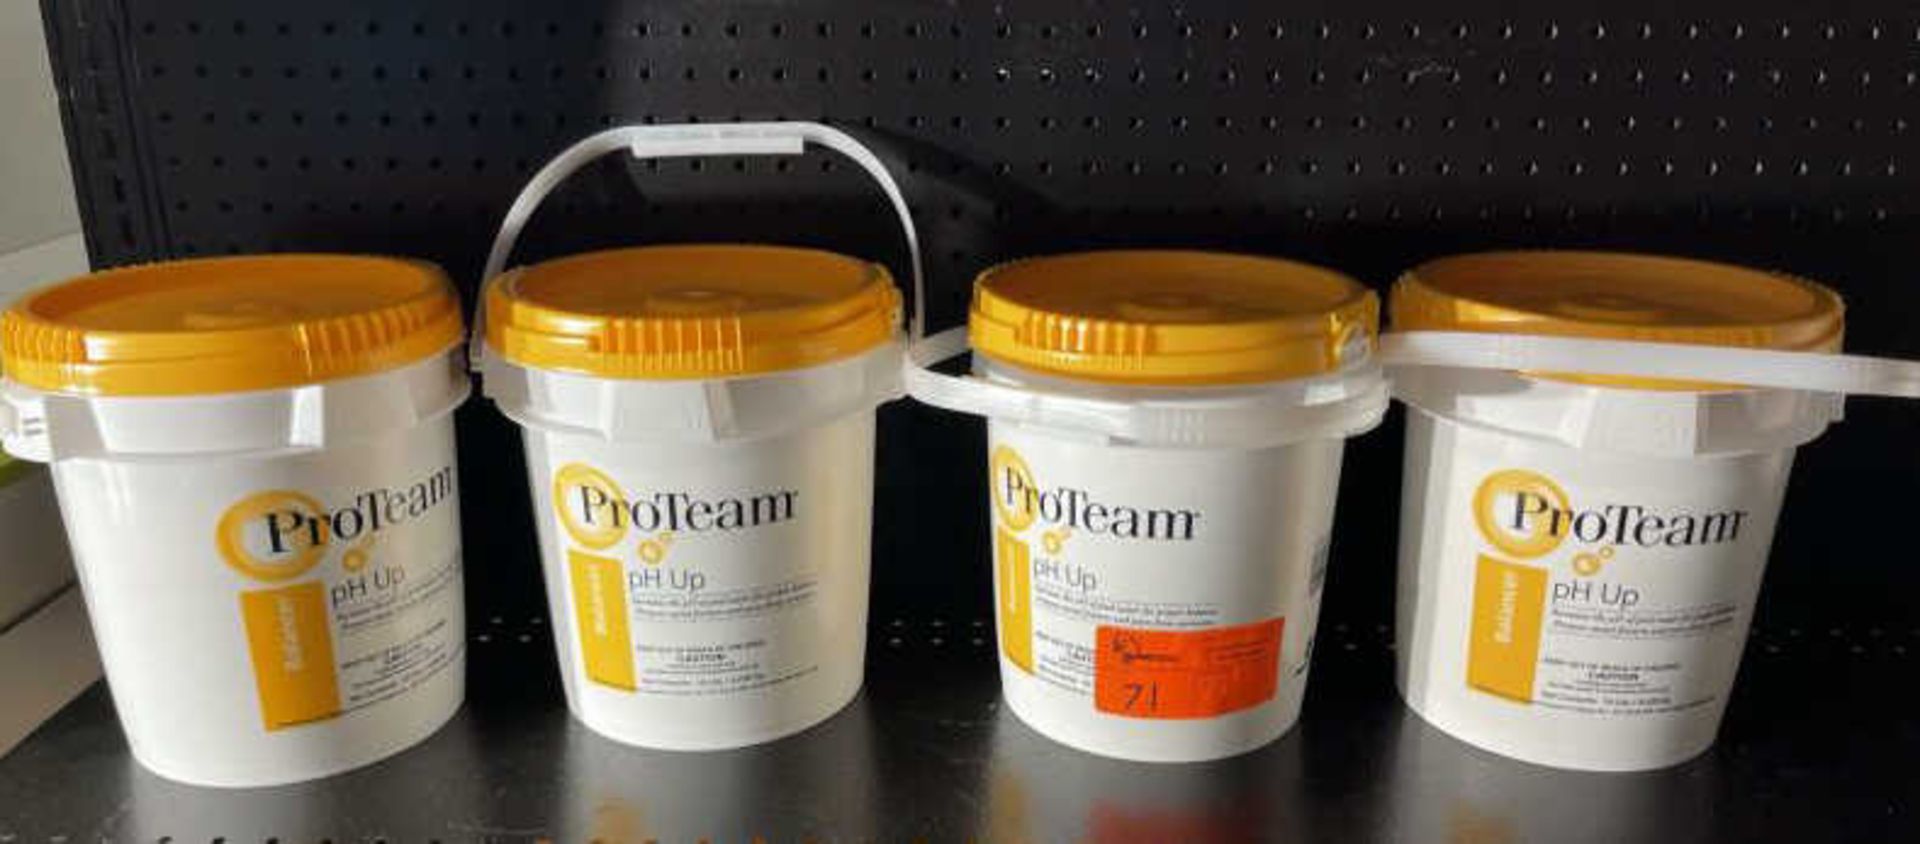 Lot of (4) 10# containers of ProTeam PH Up